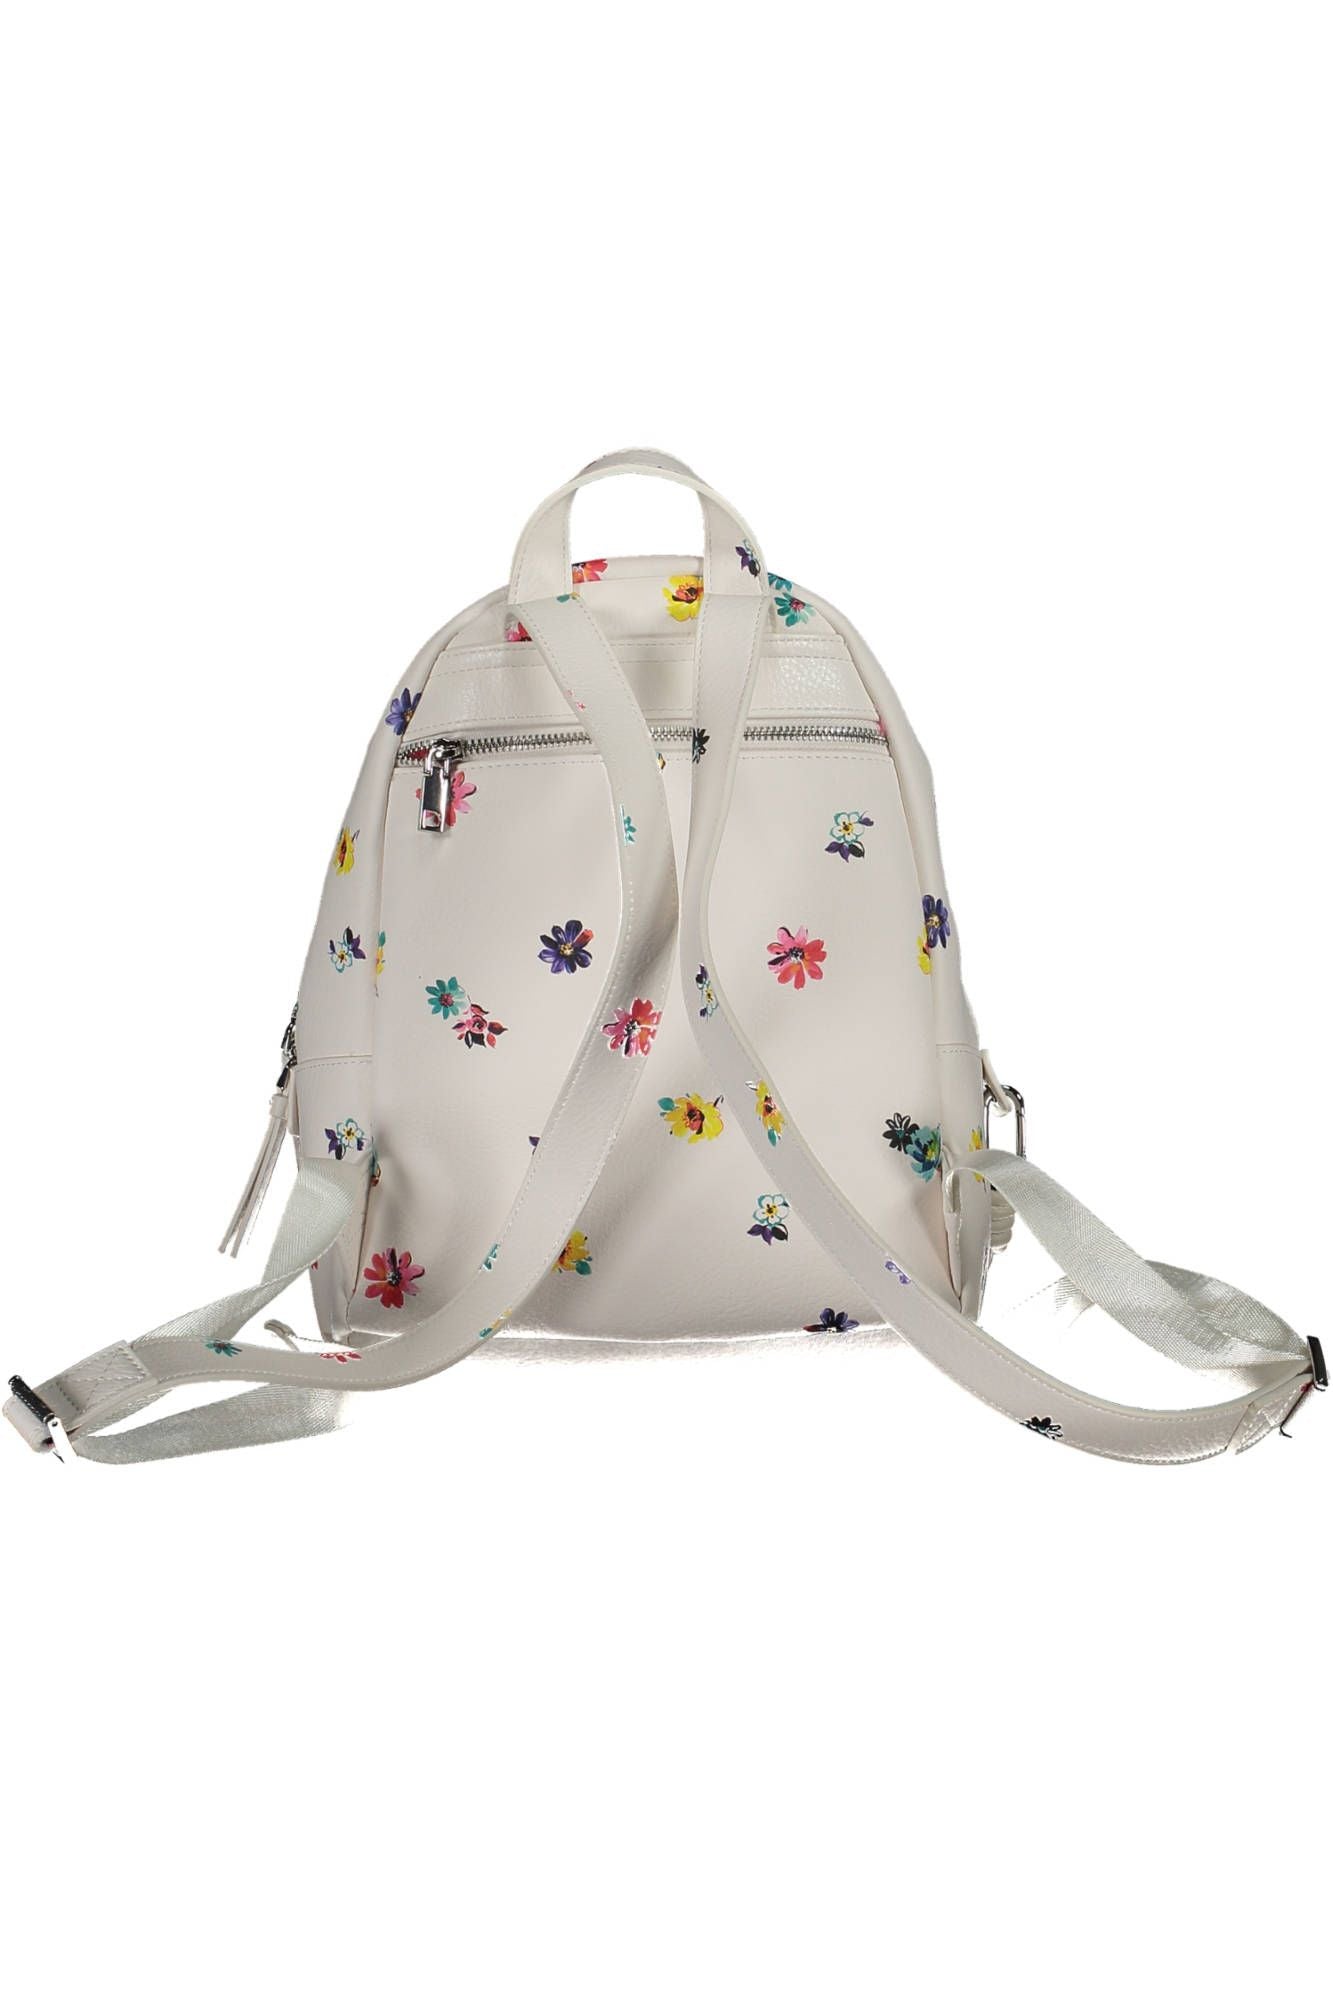 Chic White Backpack with Contrasting Details